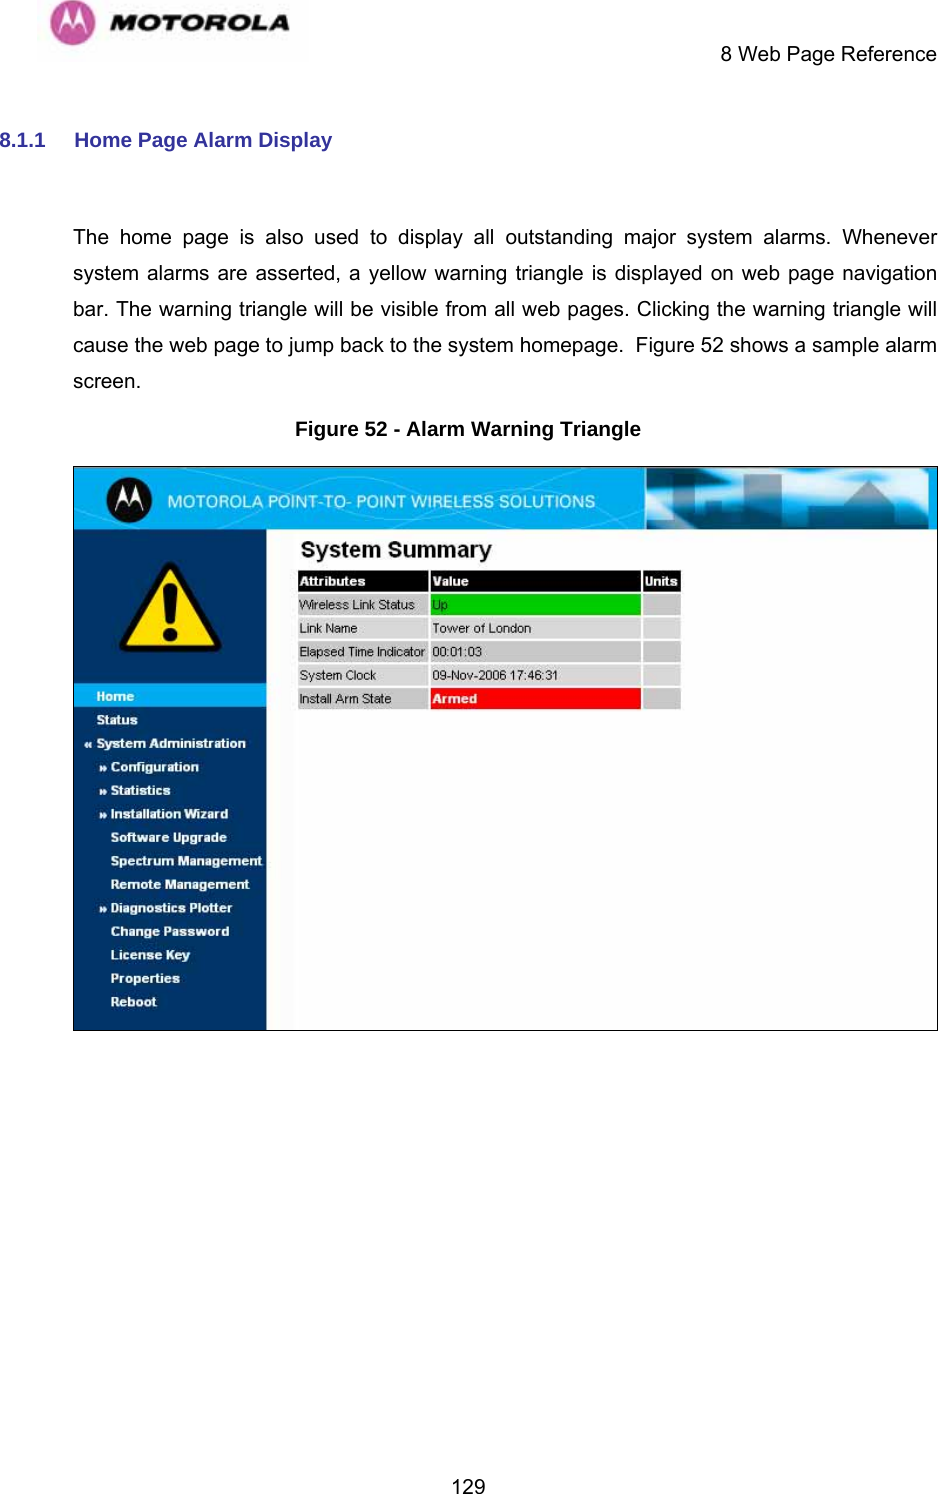     8 Web Page Reference  1298.1.1  Home Page Alarm Display  The home page is also used to display all outstanding major system alarms. Whenever system alarms are asserted, a yellow warning triangle is displayed on web page navigation bar. The warning triangle will be visible from all web pages. Clicking the warning triangle will cause the web page to jump back to the system homepage.  Figure 52 shows a sample alarm screen. Figure 52 - Alarm Warning Triangle   